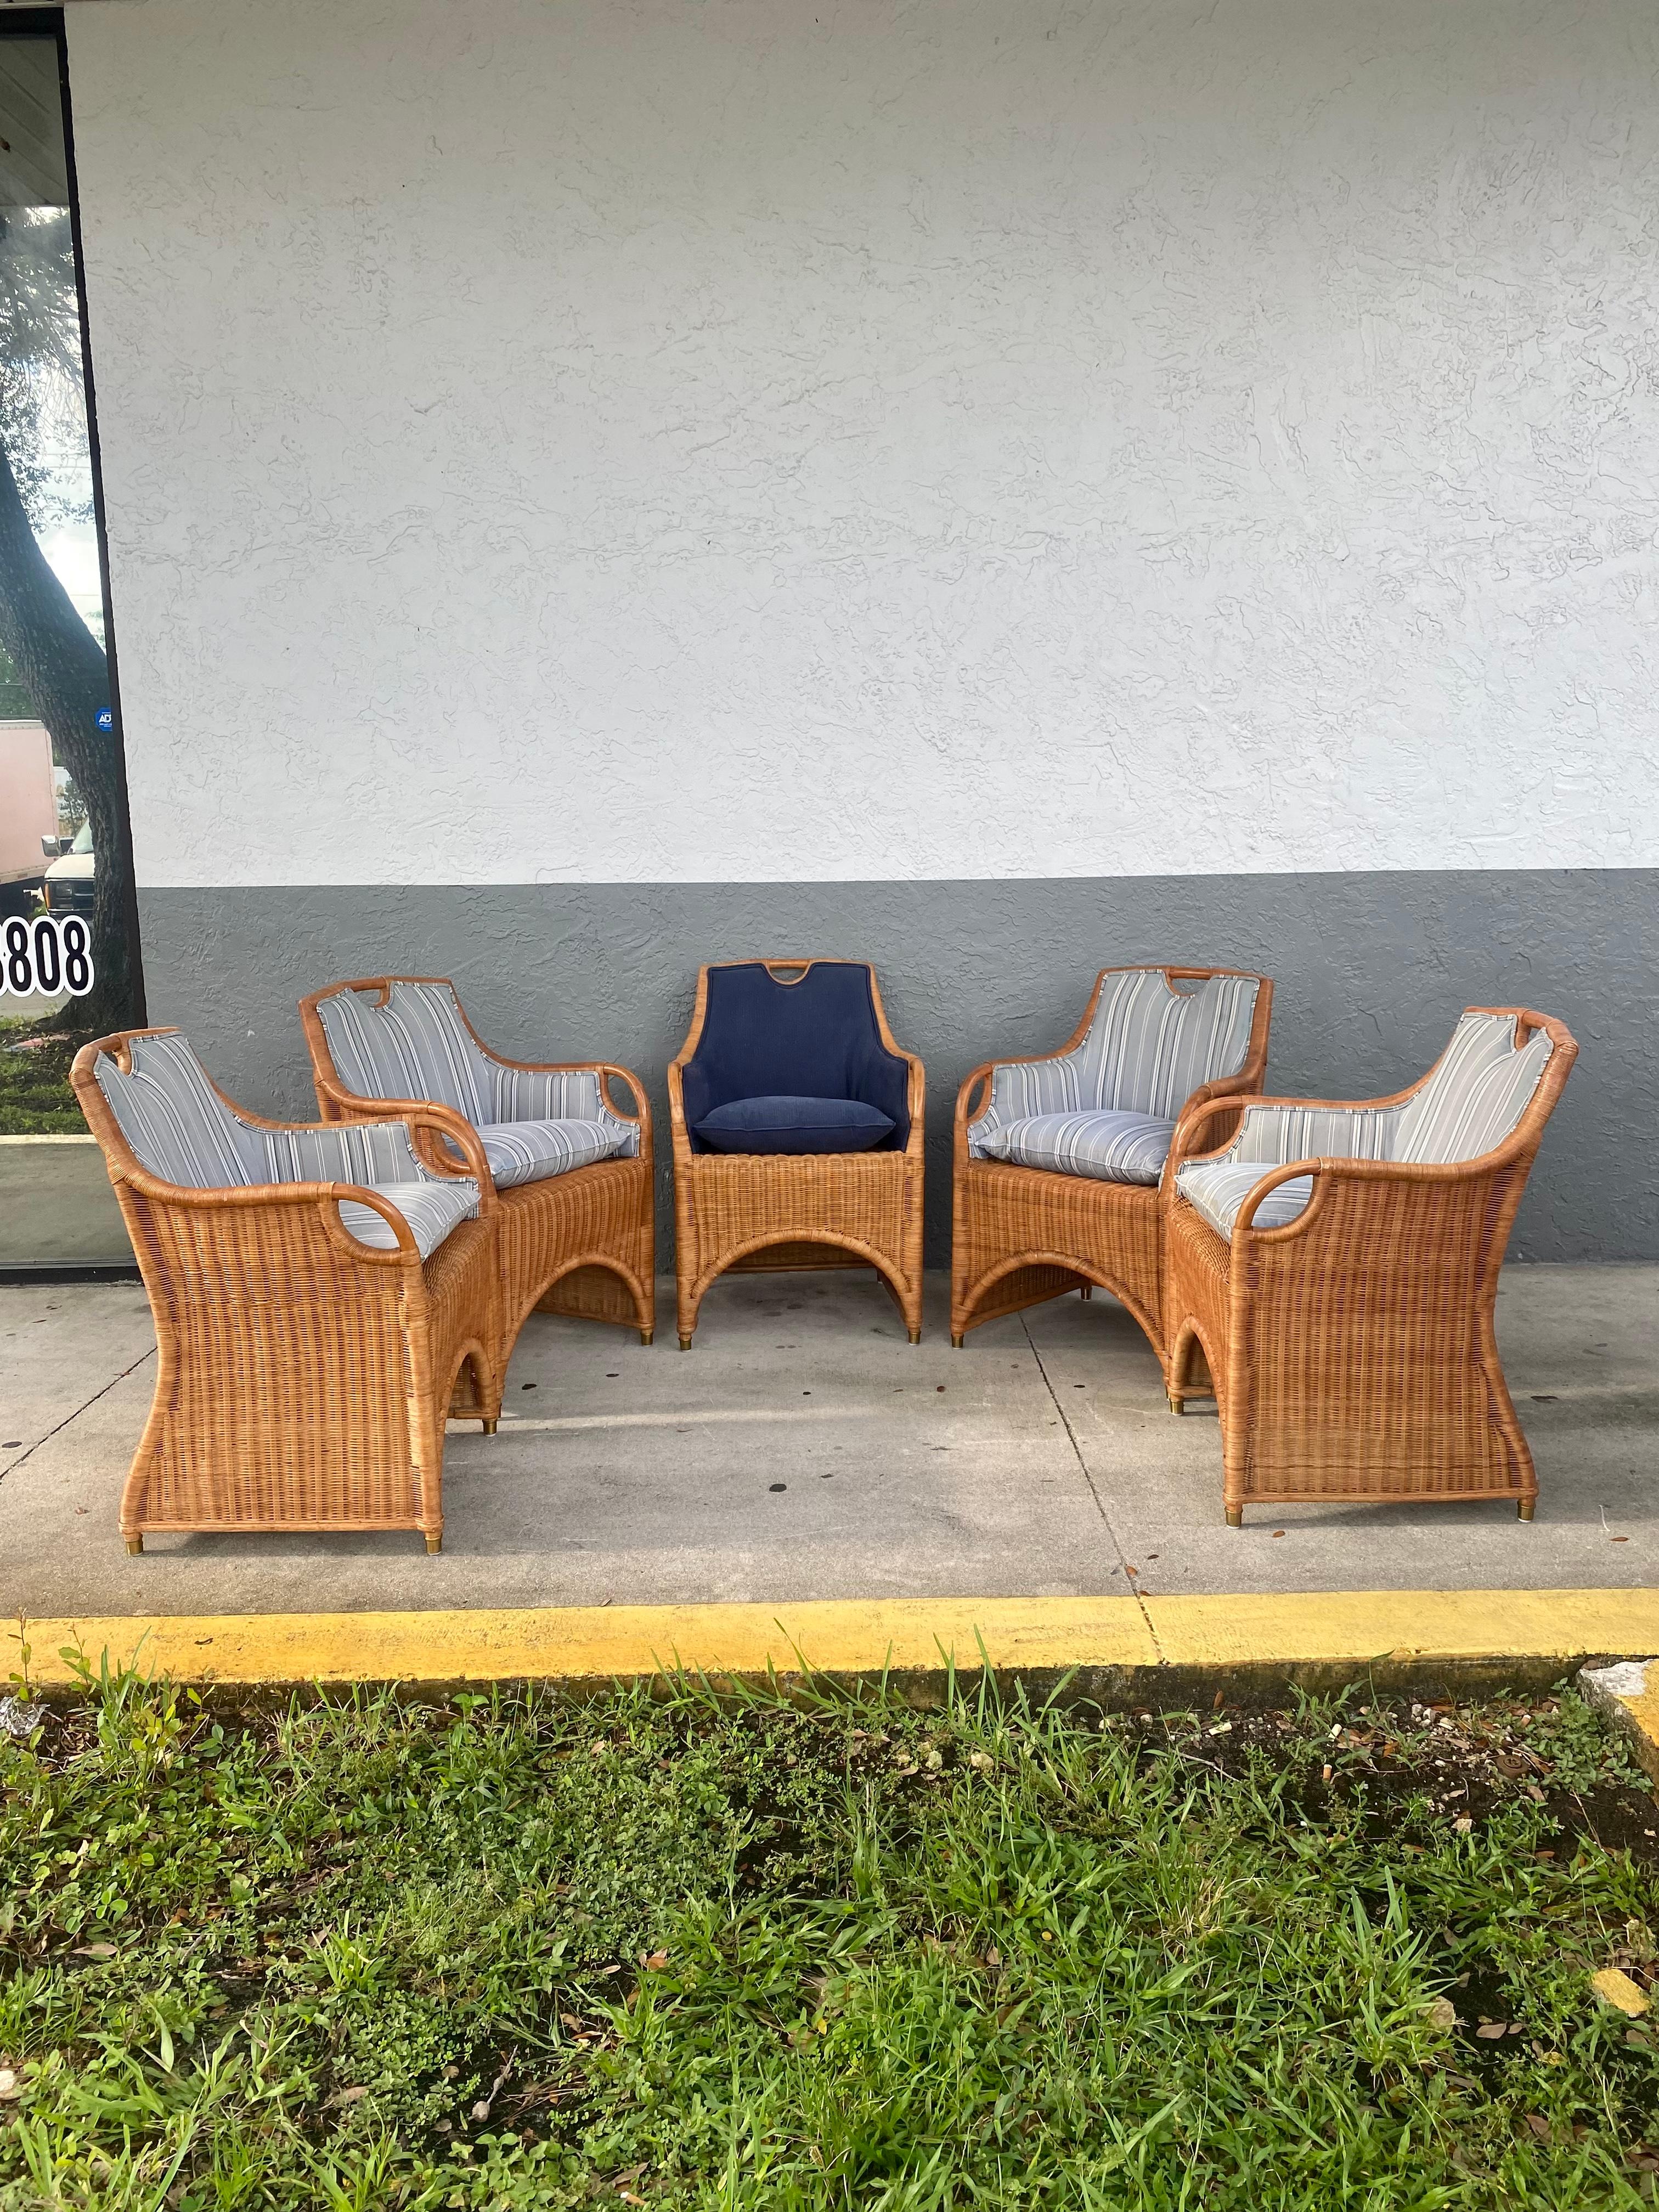 On offer on this occasion is one of the most stunning rattan chairs you could hope to find. This is an ultra-rare opportunity to acquire what is, unequivocally, the best of the best, it being a most spectacular and beautifully-presented chairs.